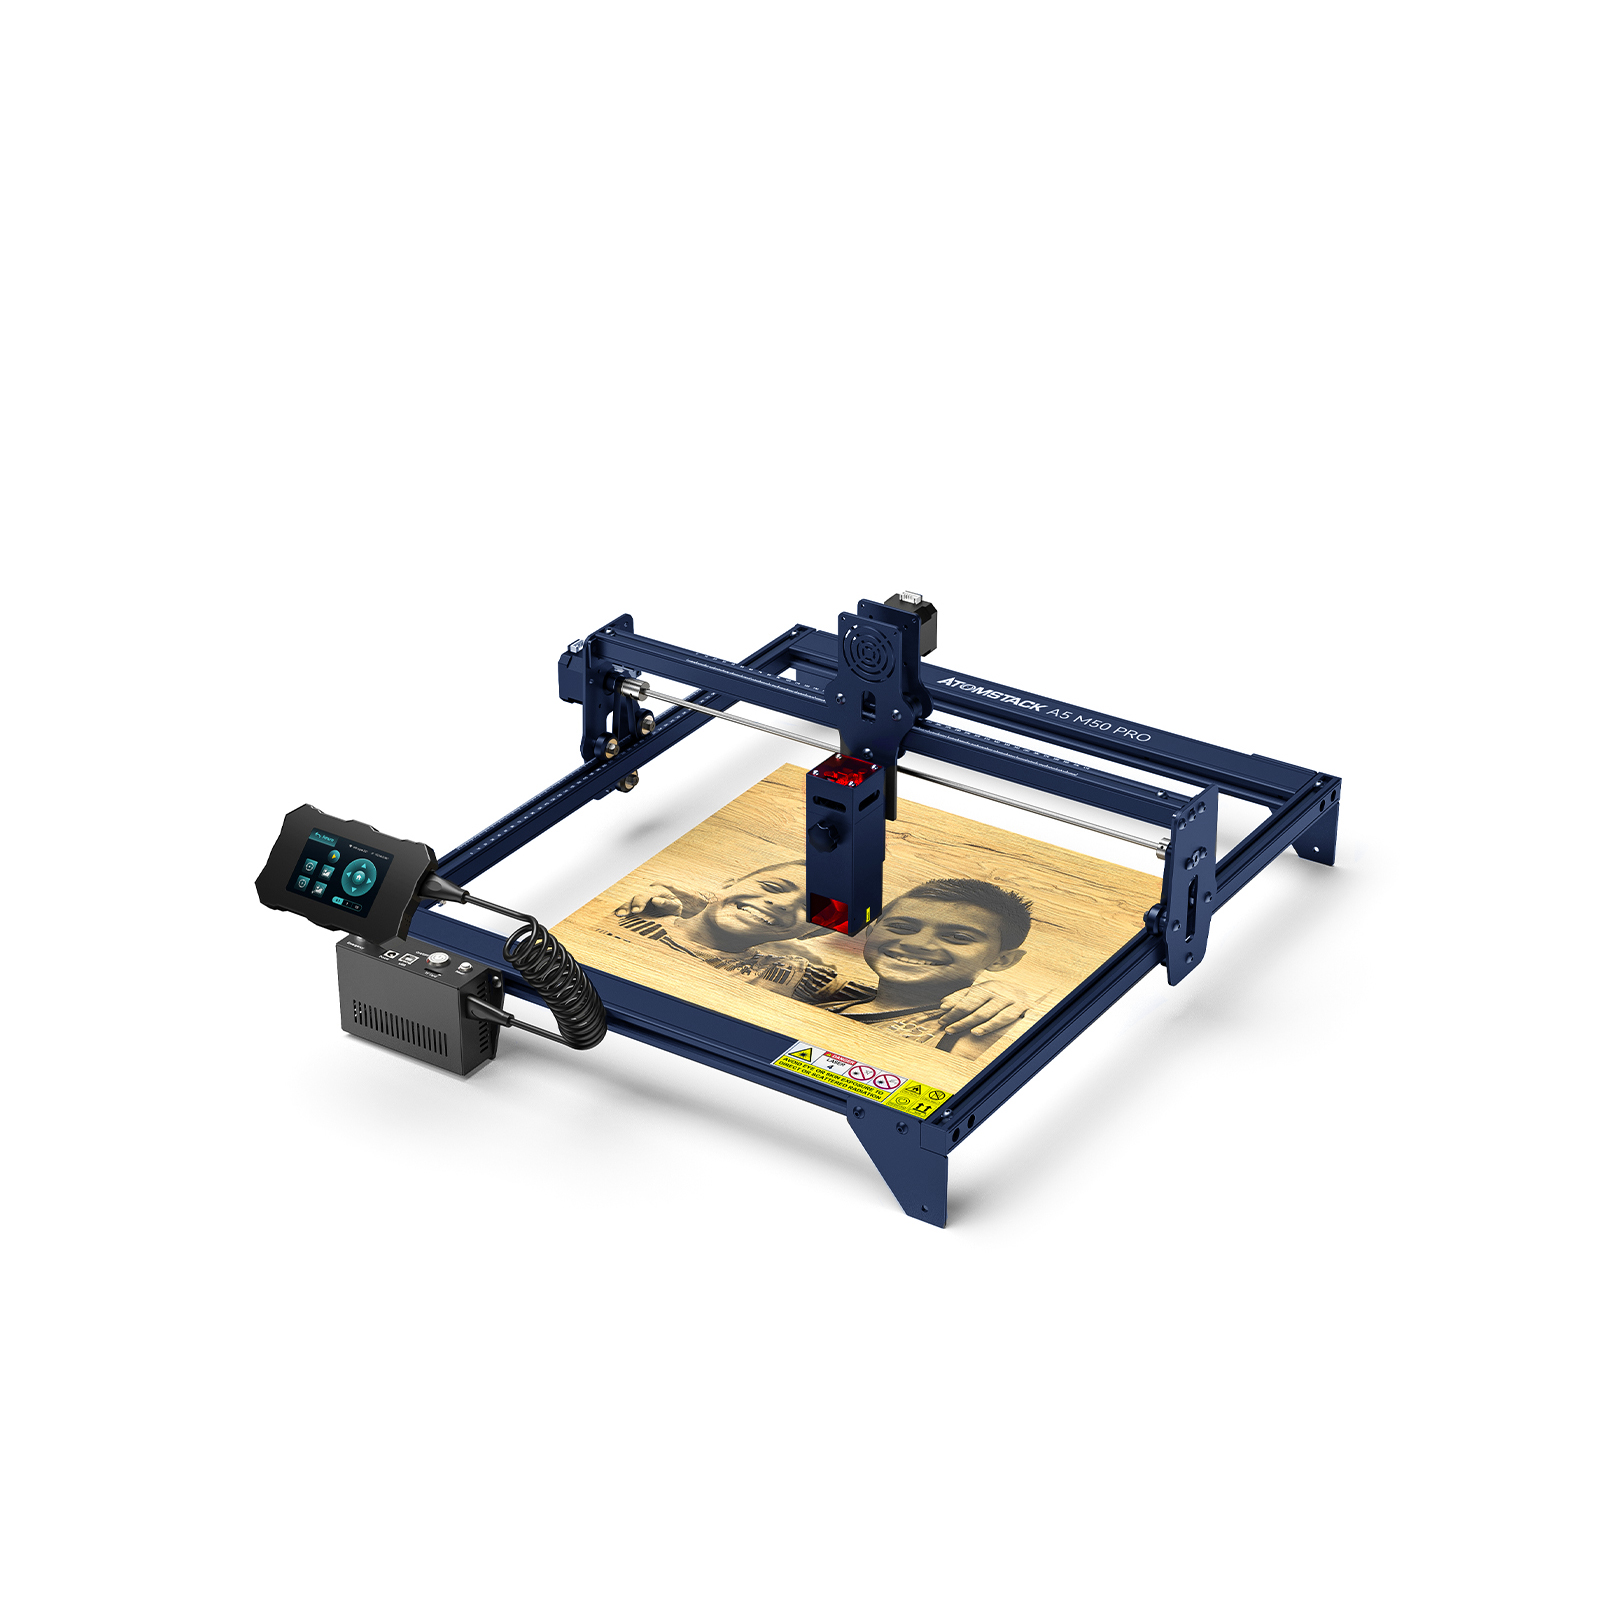 Find GEEKCREITxATOMSTACK A5 M50 PRO Laser Engraver APP Control Dual Laser Engraving Cutting Machine Support Offline Engraving DIY Laser Marking for Acrylic 304 Mirror Stainless Steel Metal Wood for Sale on Gipsybee.com with cryptocurrencies